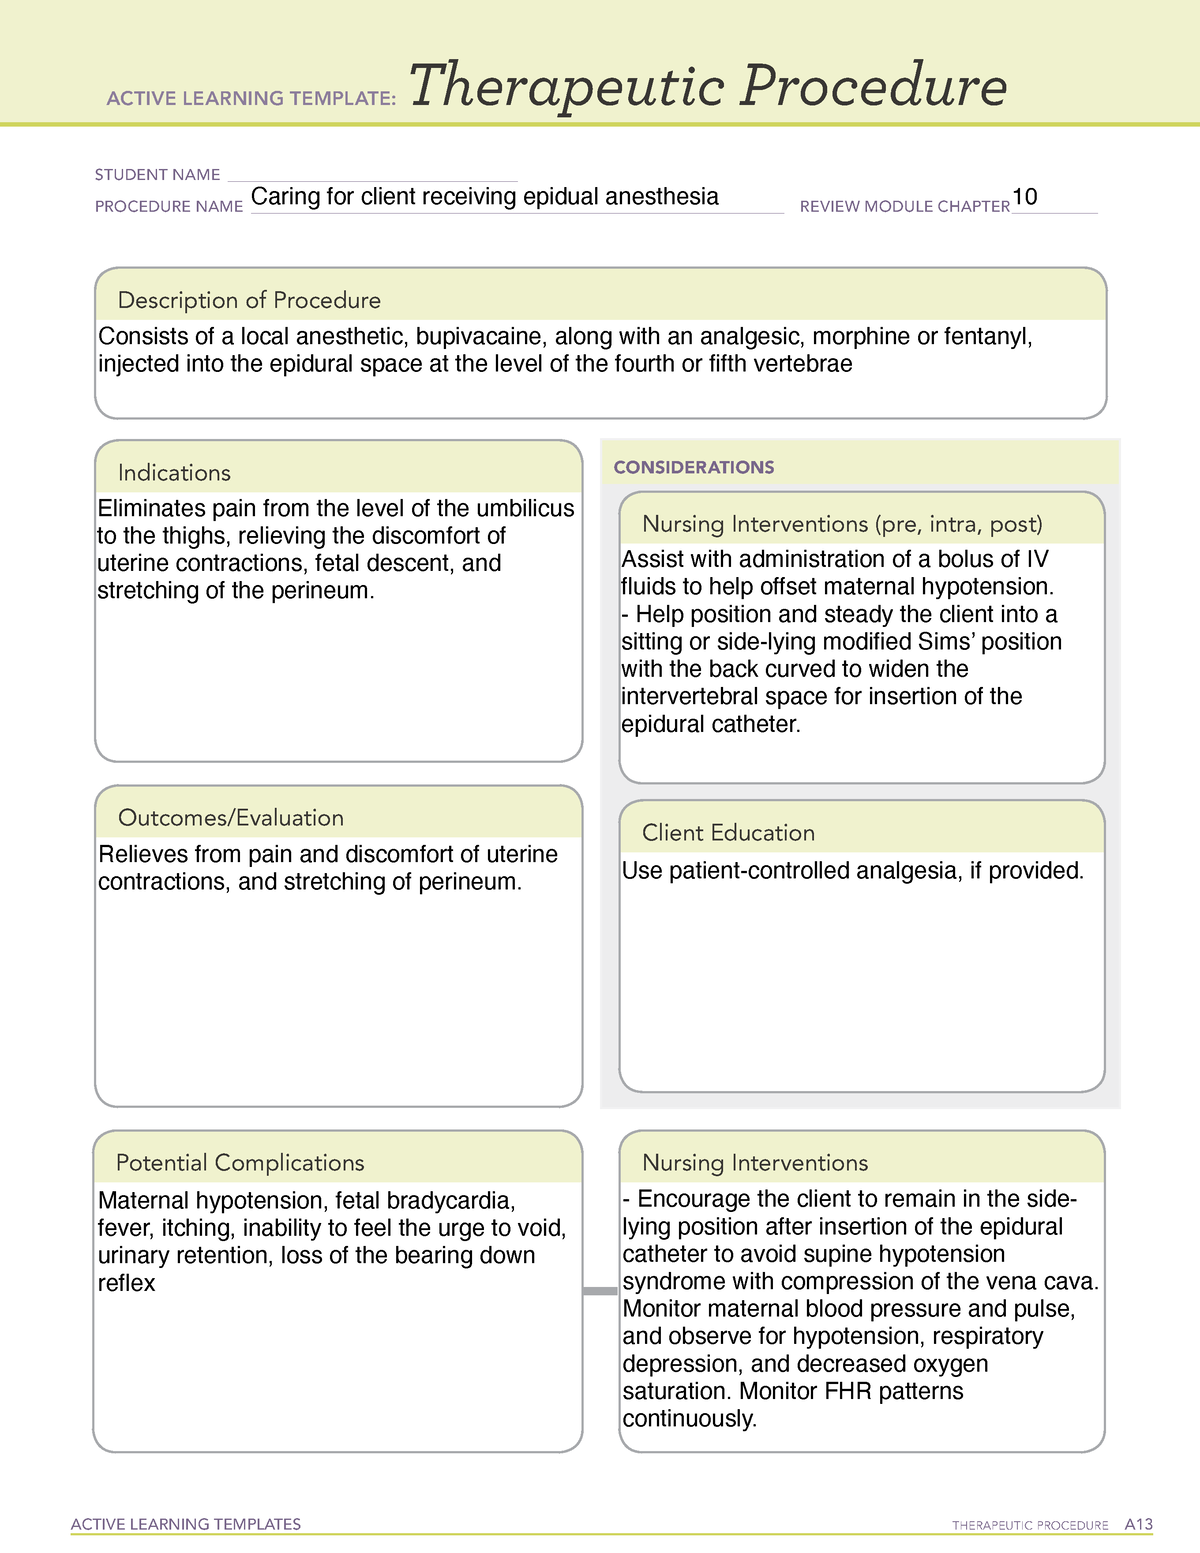 active-learning-template-therapeutic-procedure-form-3-active-learning